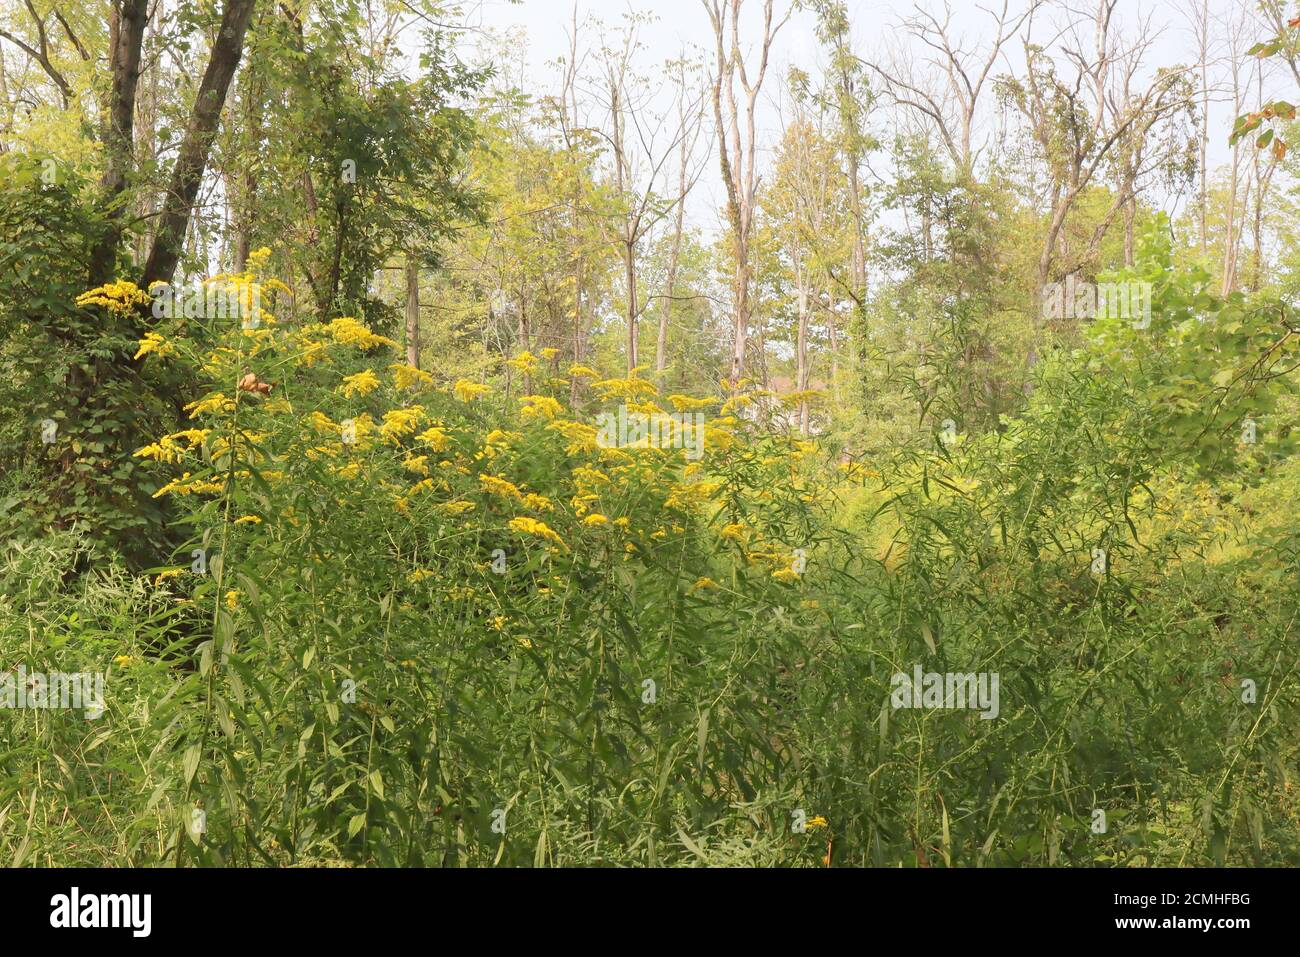 The yellow wildflowers are part of this landscape. Stock Photo